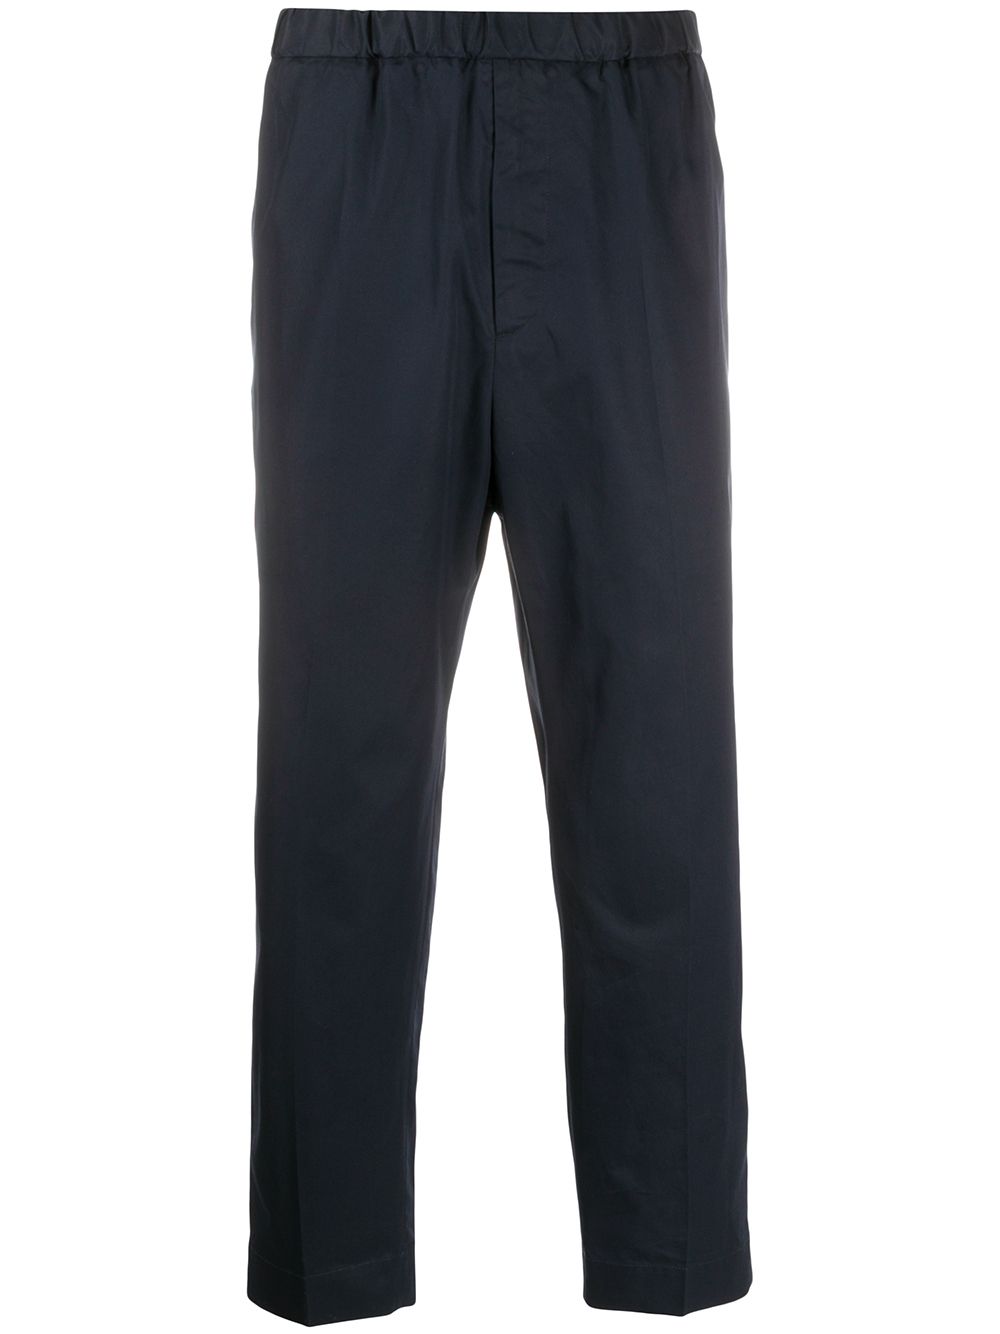 Jil Sander Tapered Cropped Trousers - Farfetch